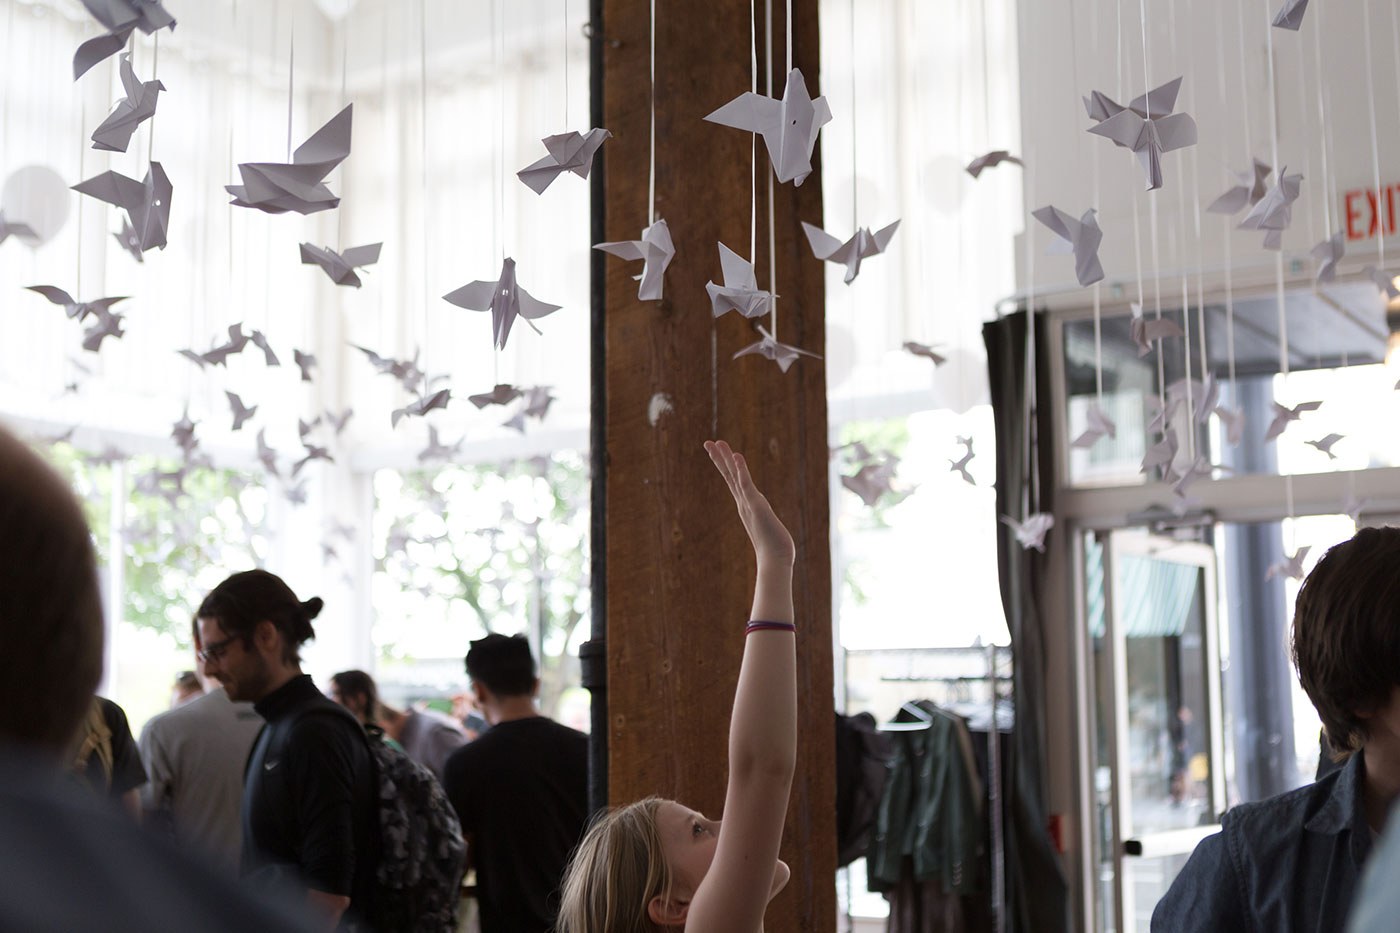 Woman reaching up to touch one of many paper cranes that are handing from the ceiling